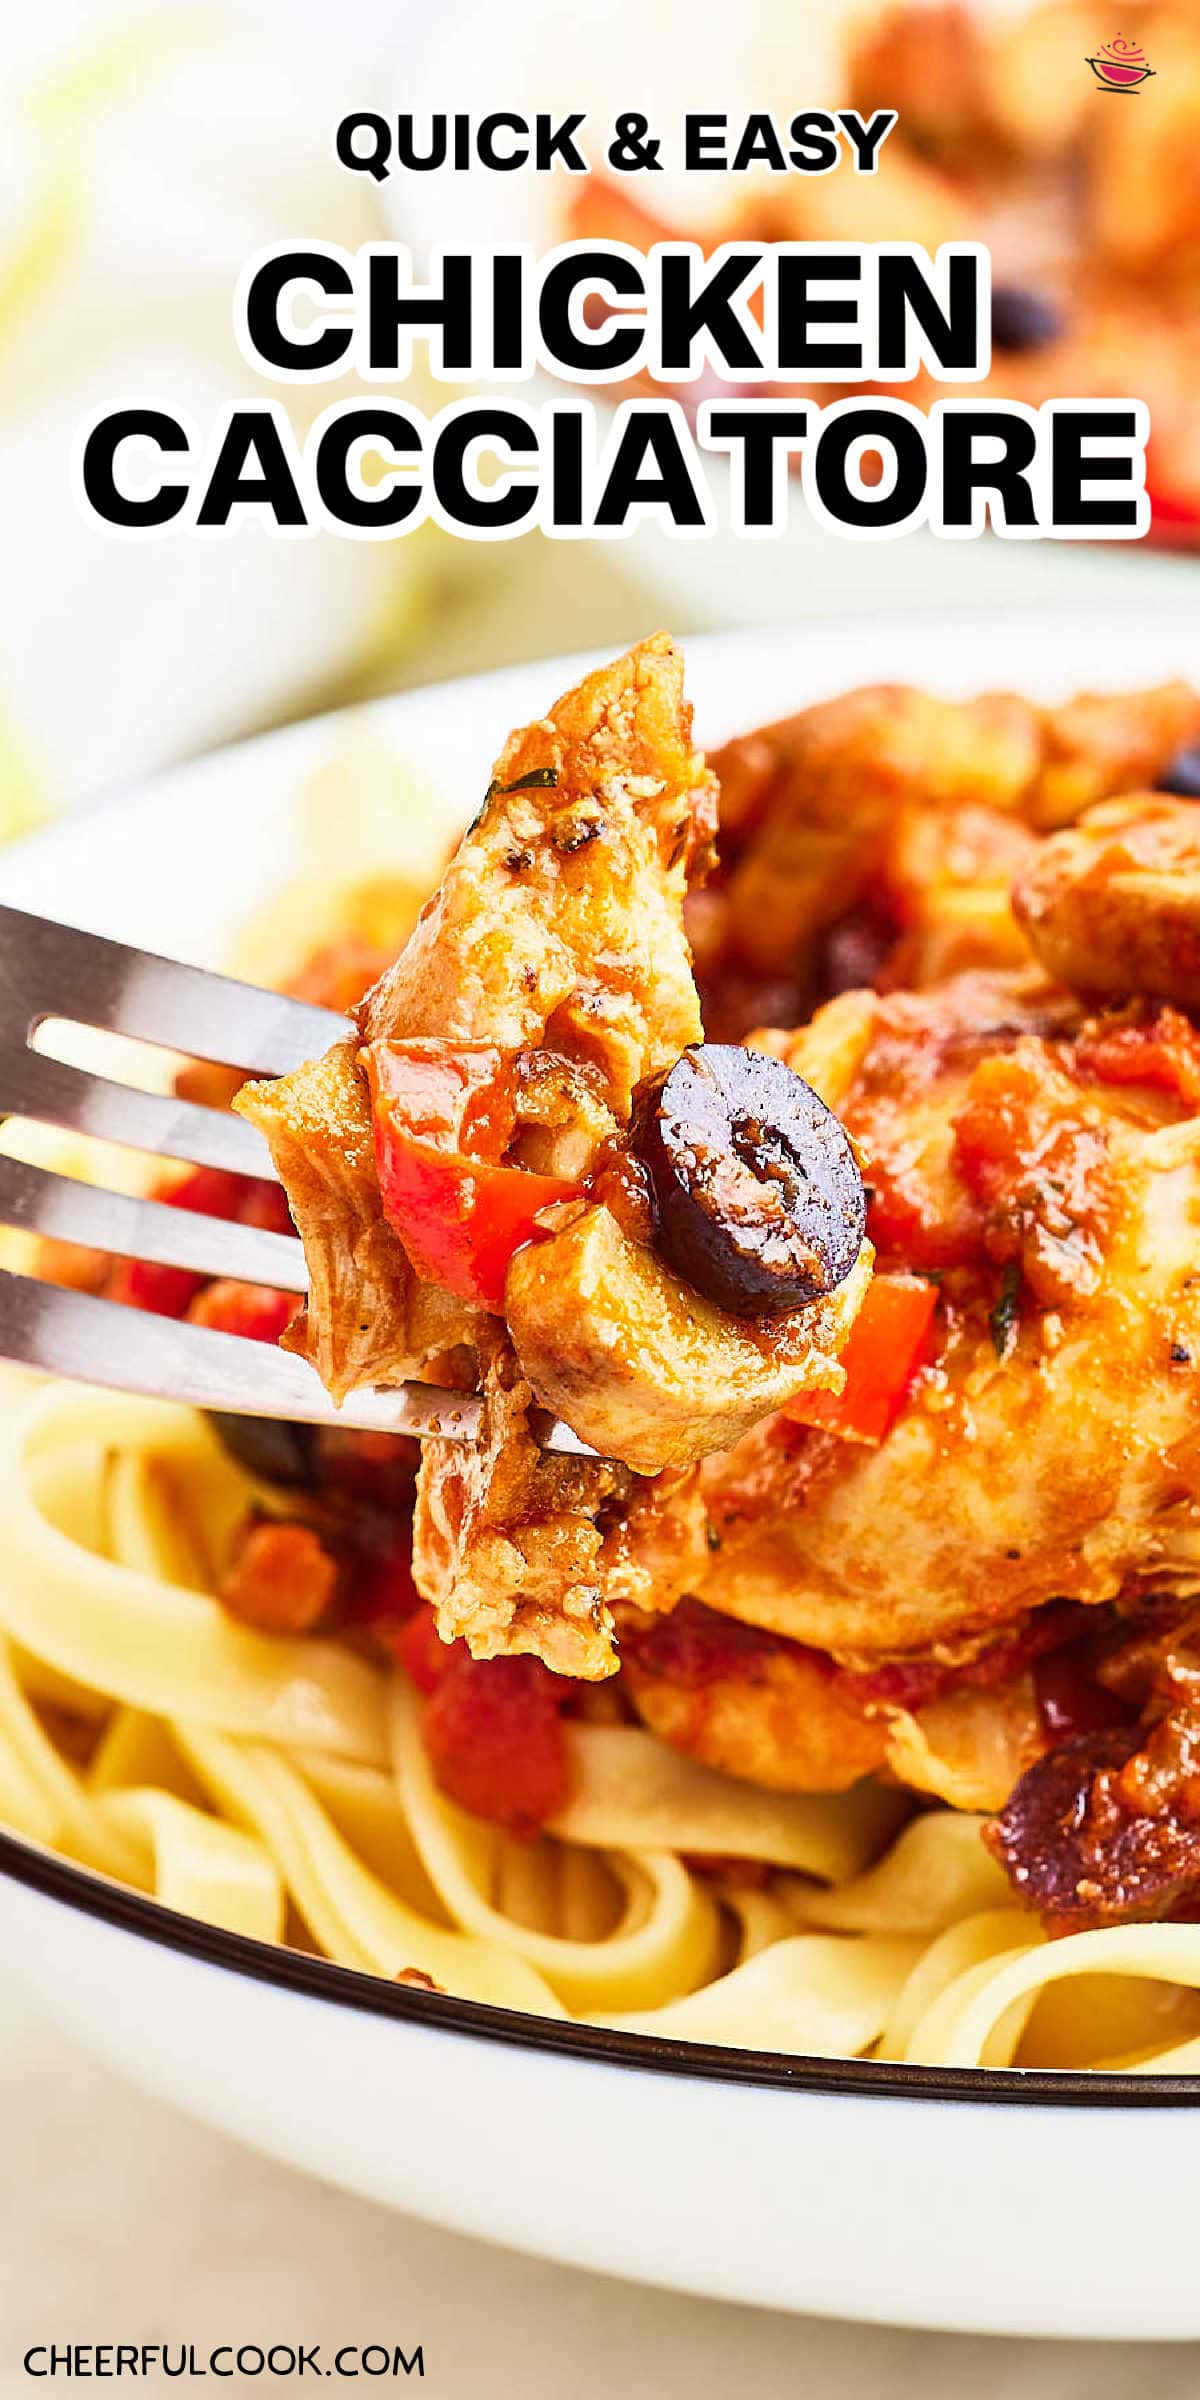 This Chicken Cacciatore is a real showstopper! A classic restaurant dish adapted so you can easily make it at home with minimal ingredients. Serve over pasta, potatoes, rice, or even polenta! #chickencacciatore #cheerfulcook #restaurantrecipes #chicken #recipeseasy #weeknightdinner via @cheerfulcook